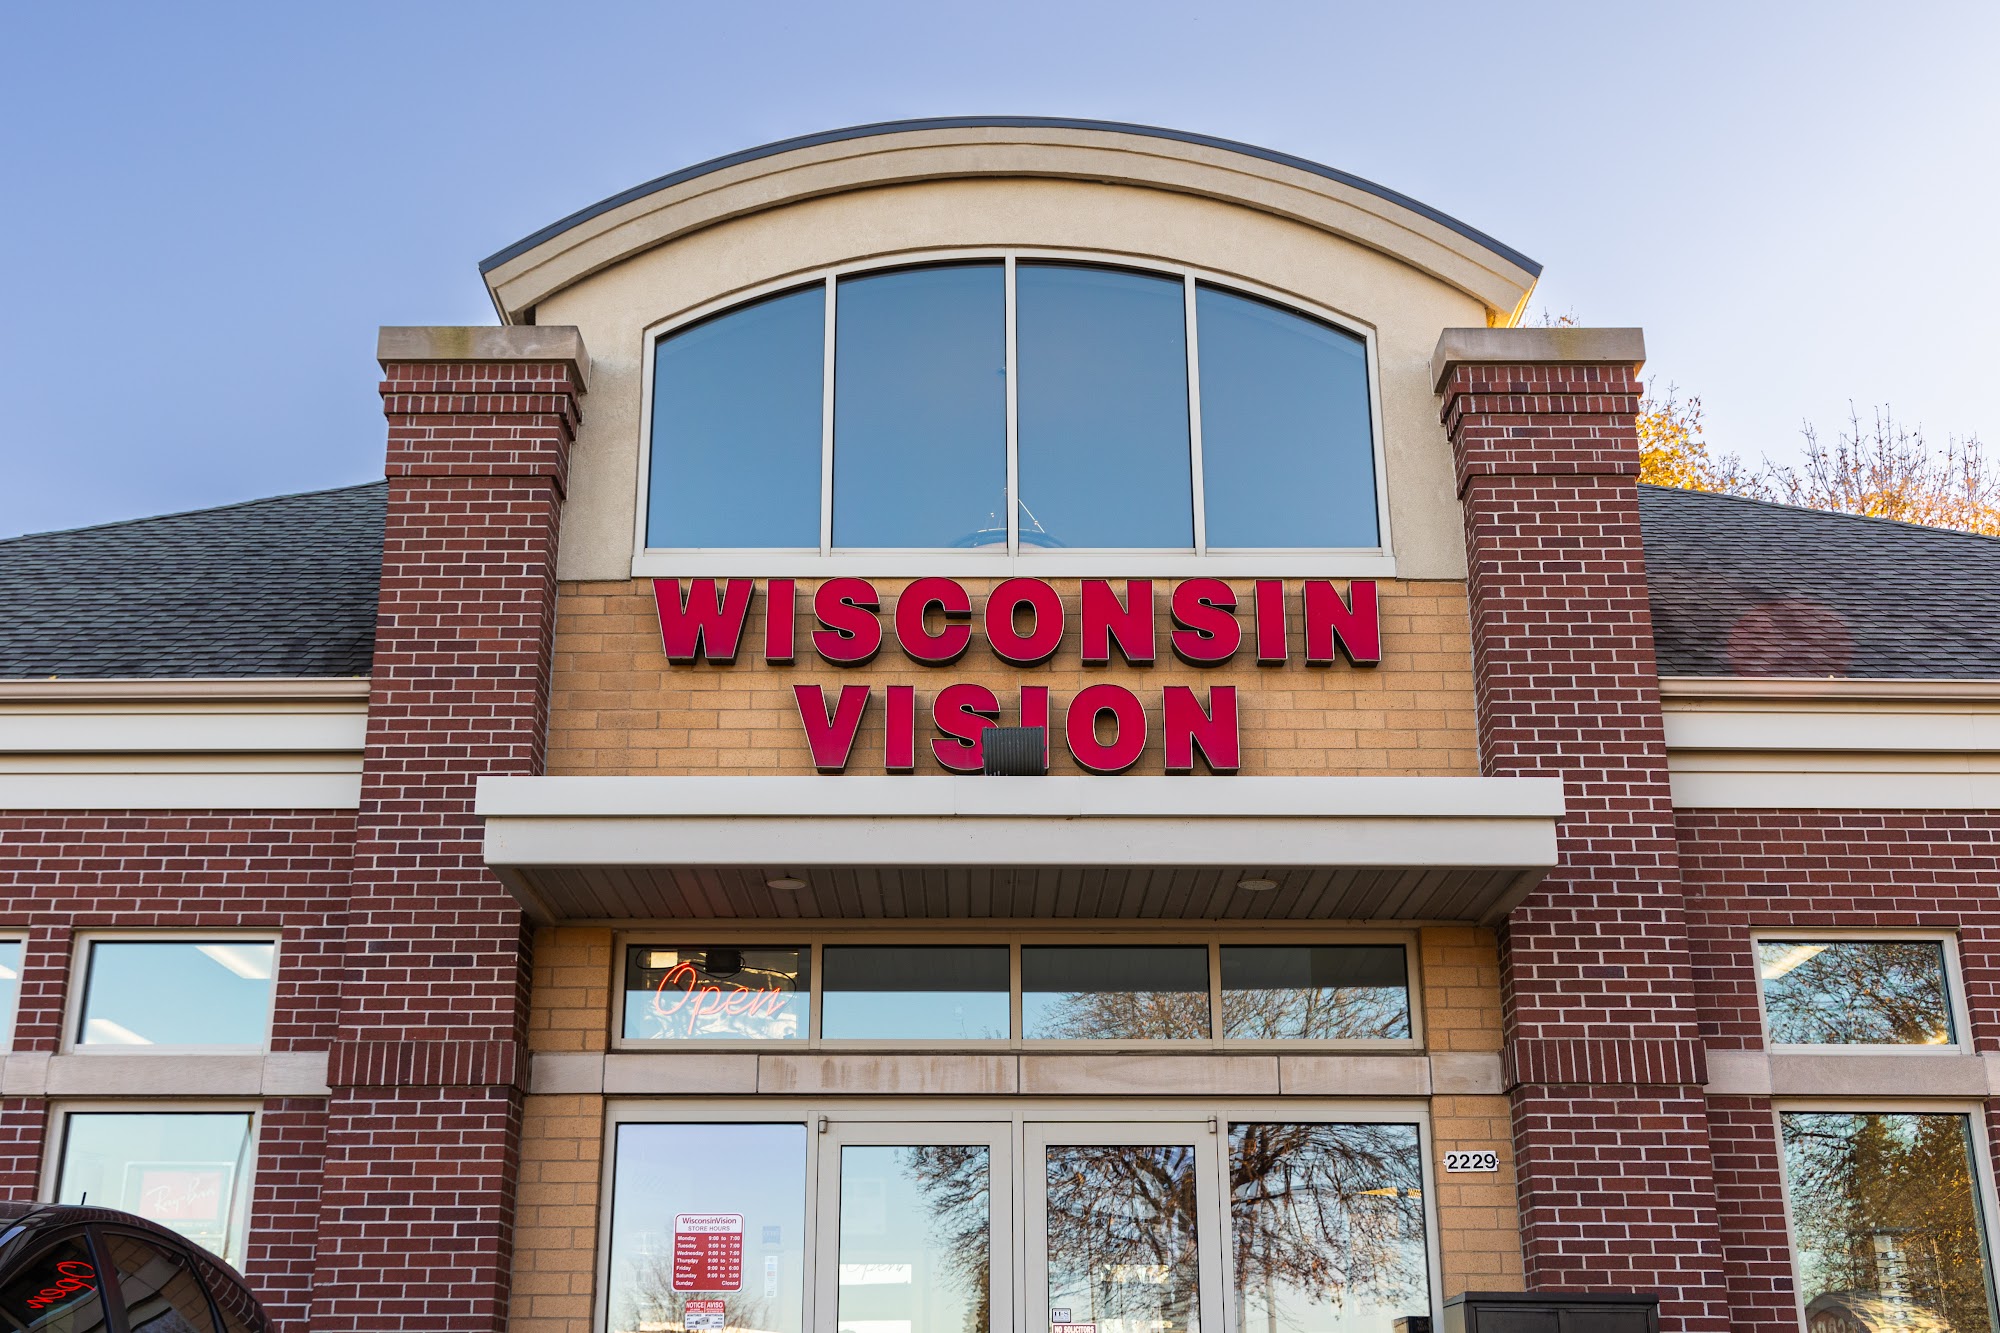 Wisconsin Vision